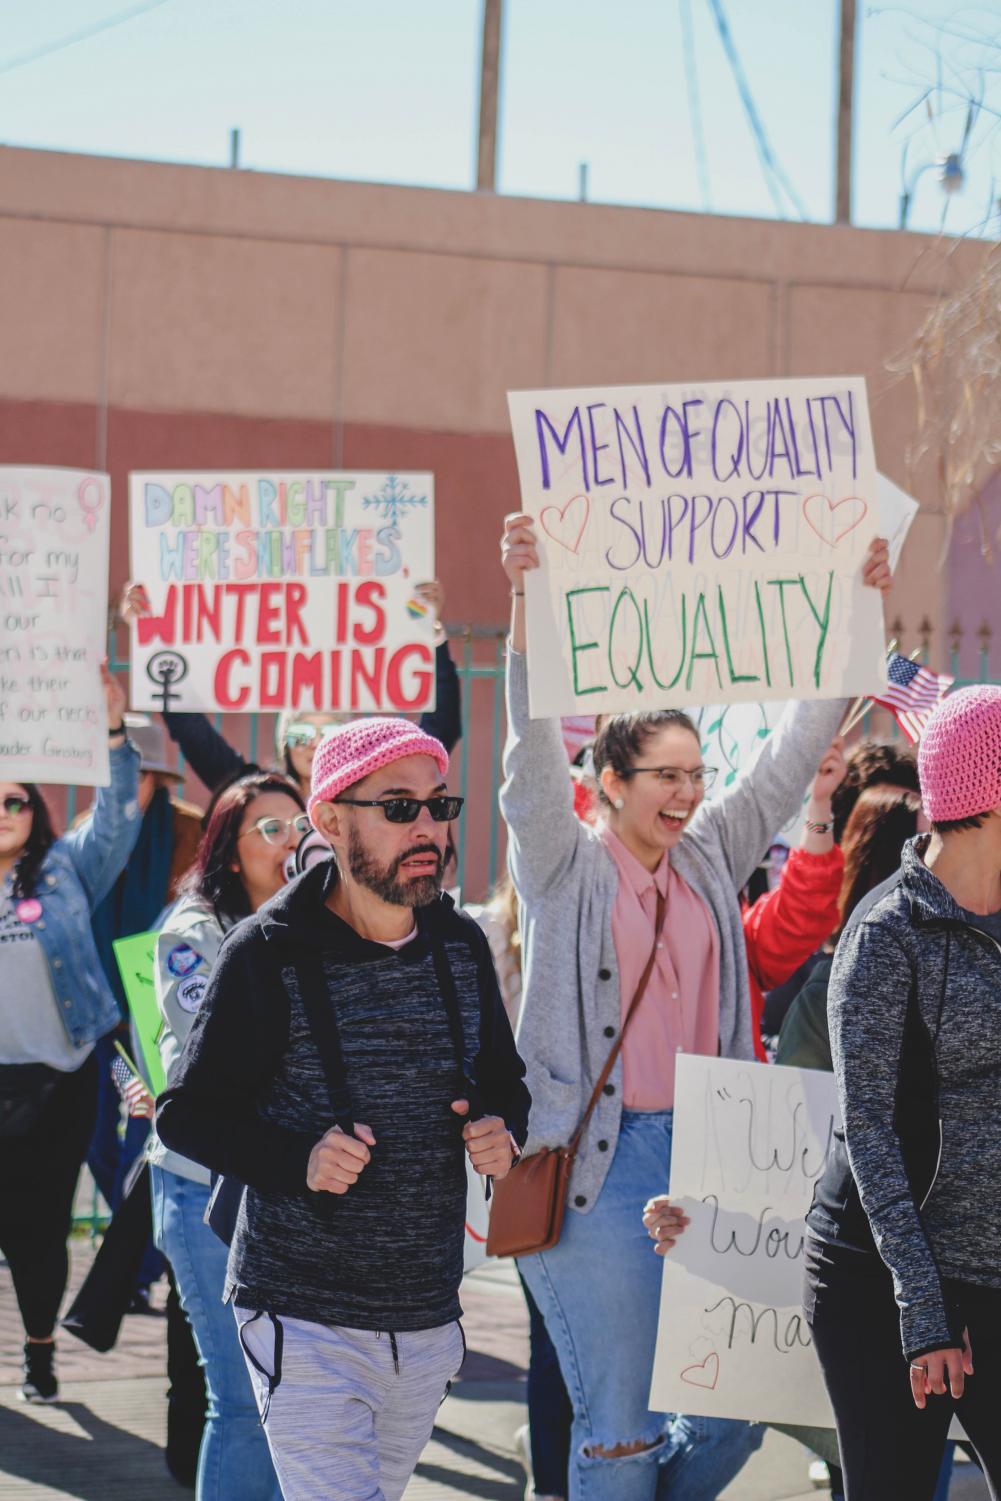 Hundreds+gather+for+third+annual+Women%E2%80%99s+March+in+Downtown+El+Paso